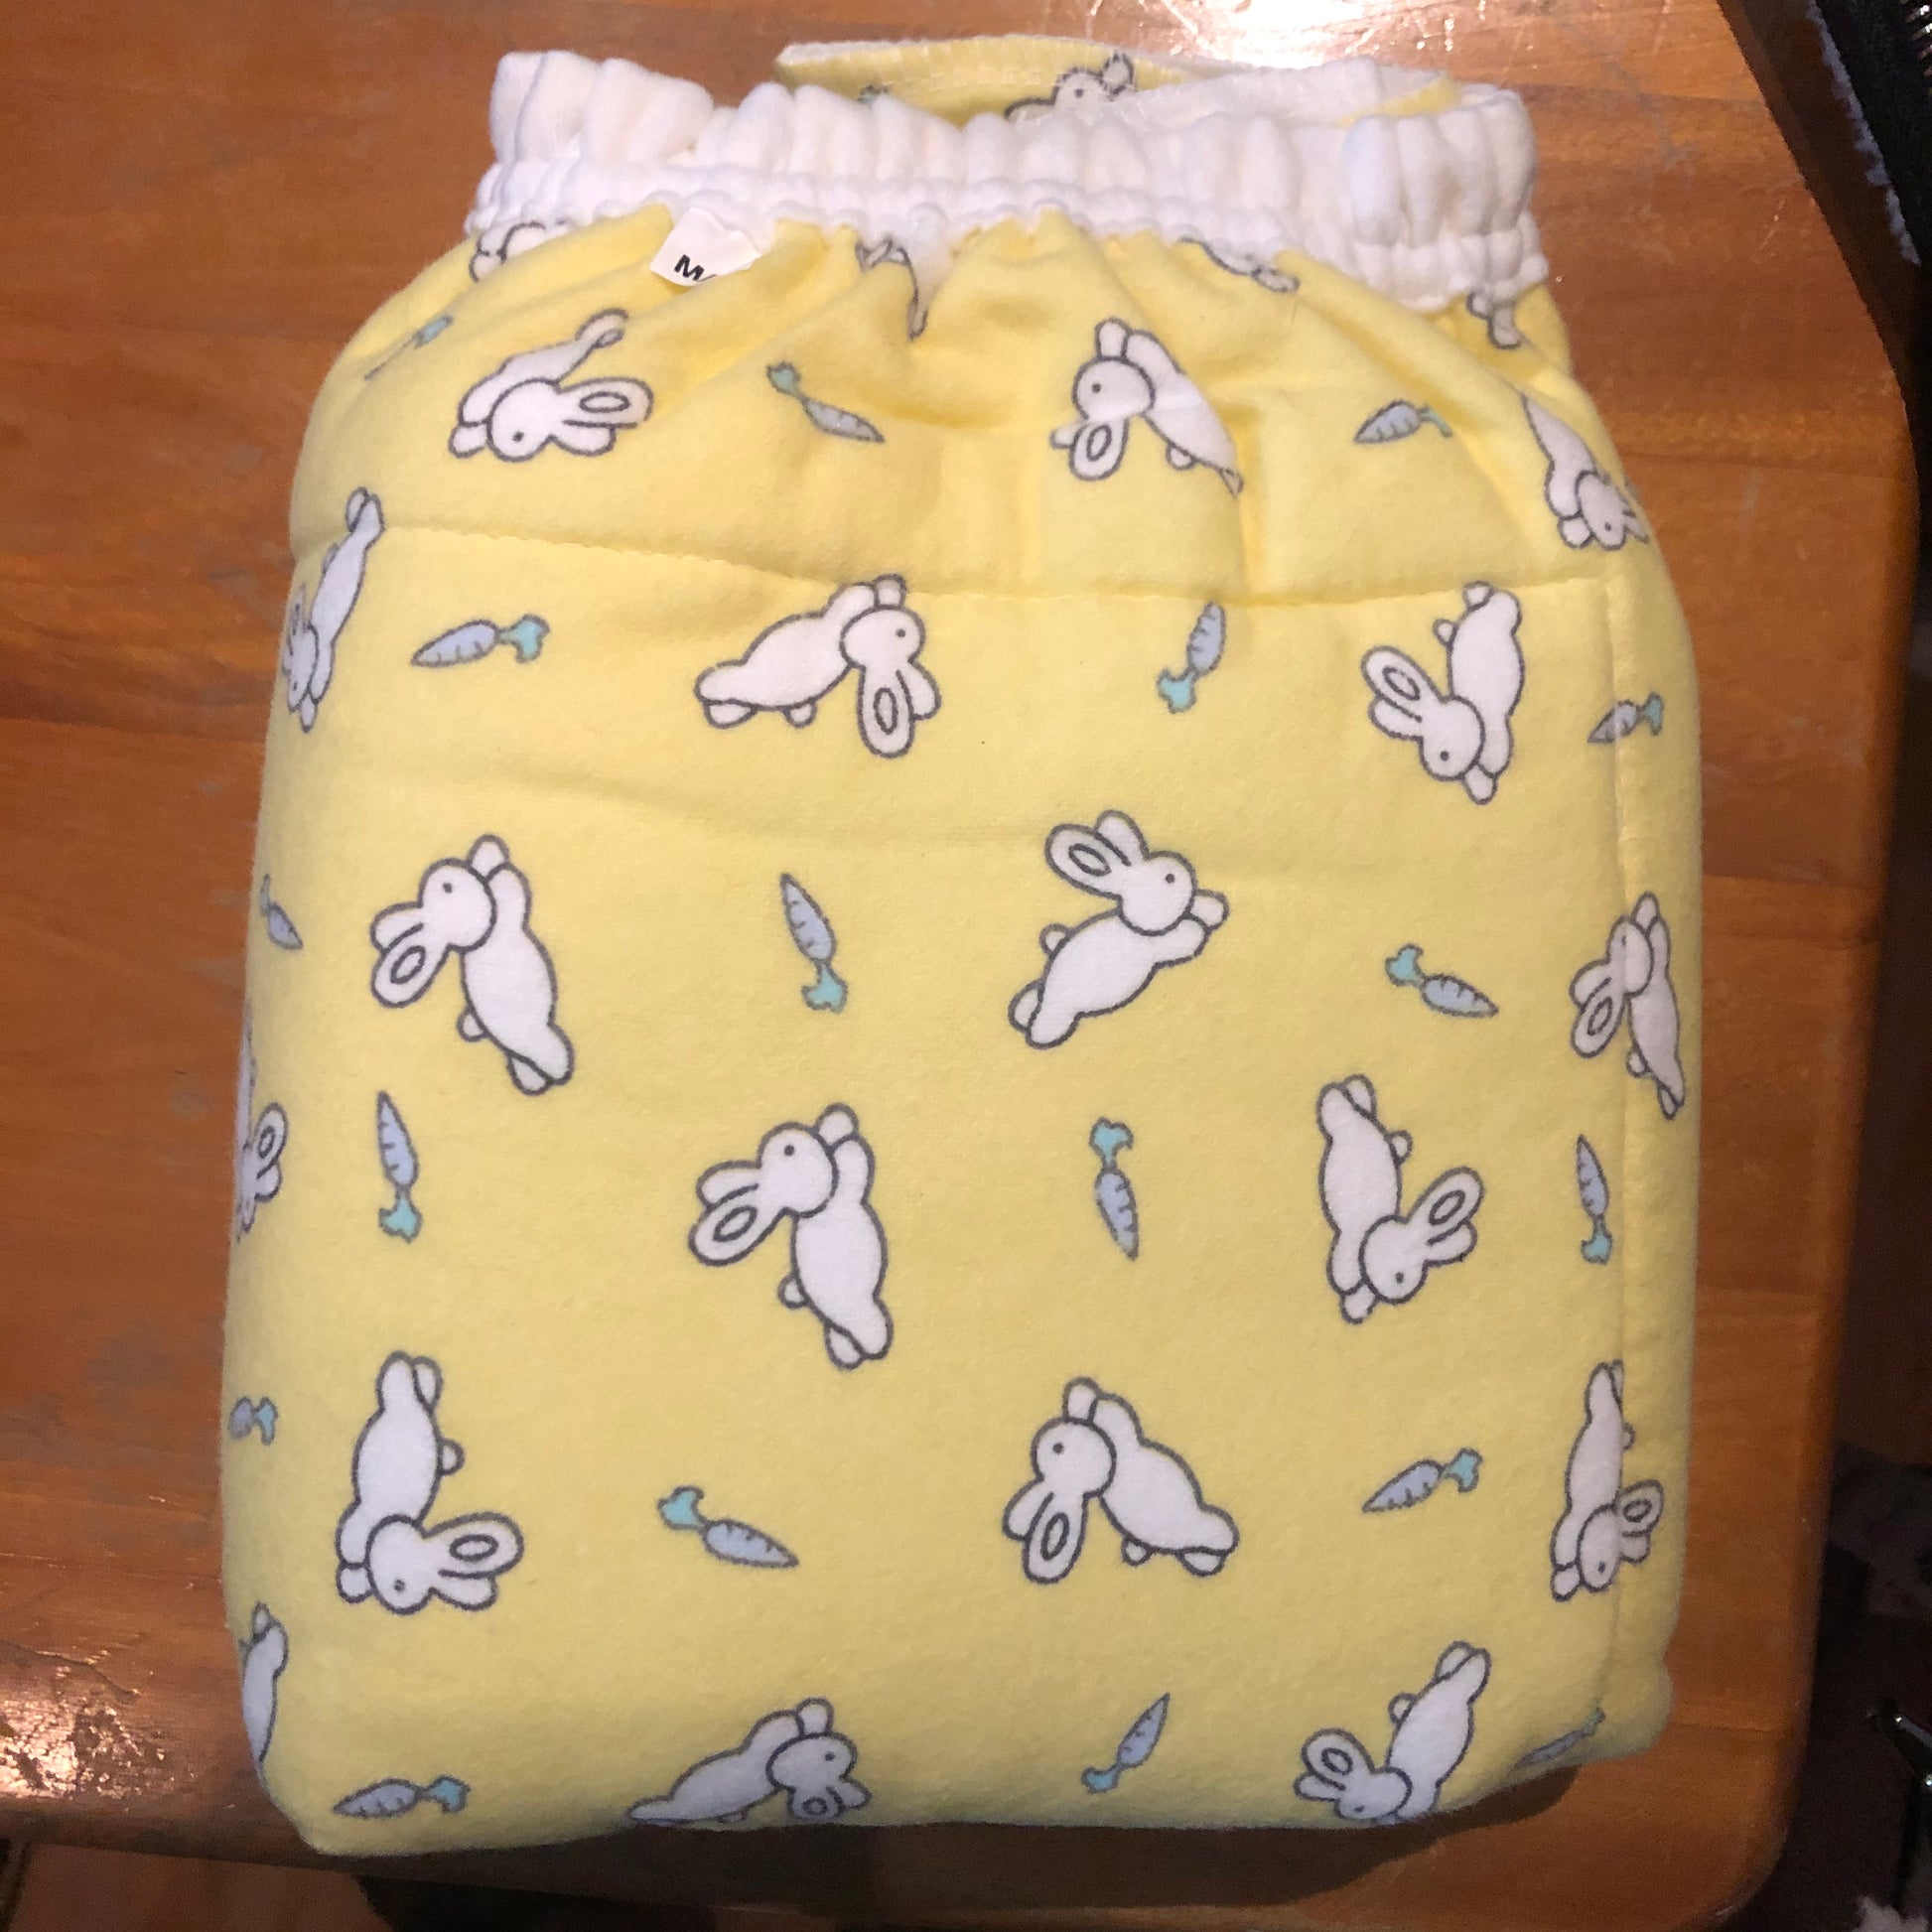 The Yellow Bunnies Cloth Diaper with Velcro Closure.